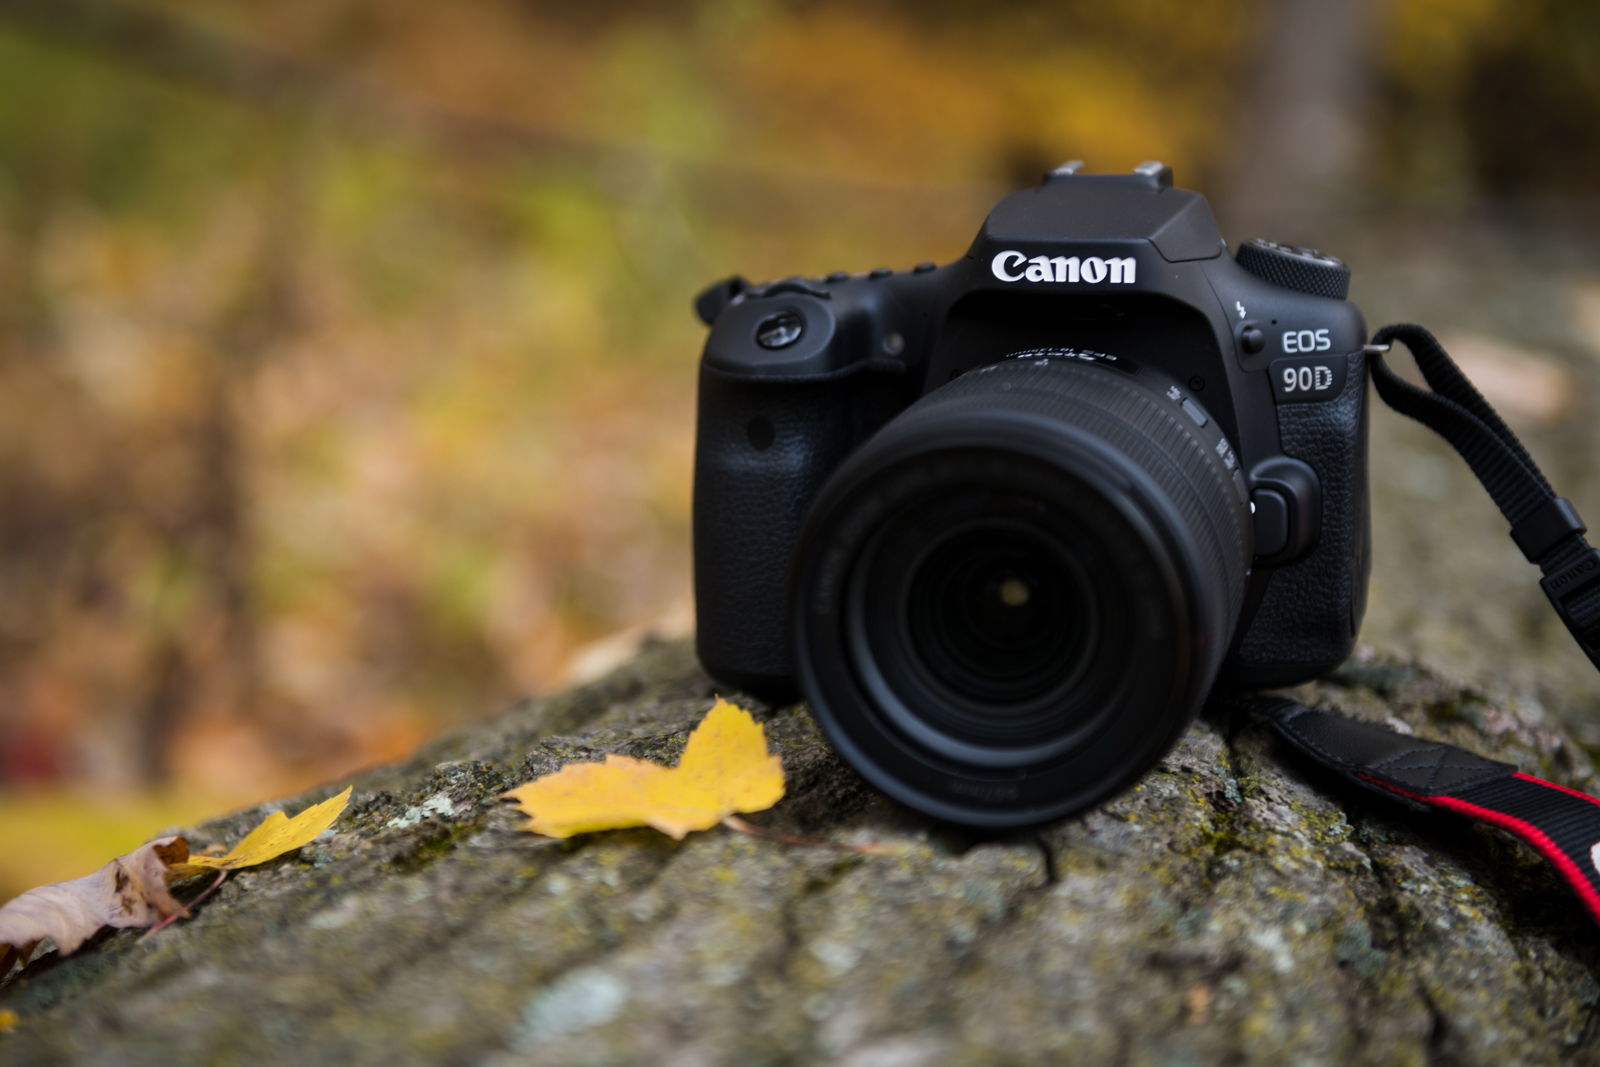 Hands-on with the Canon EOS 90D: Digital Photography Review